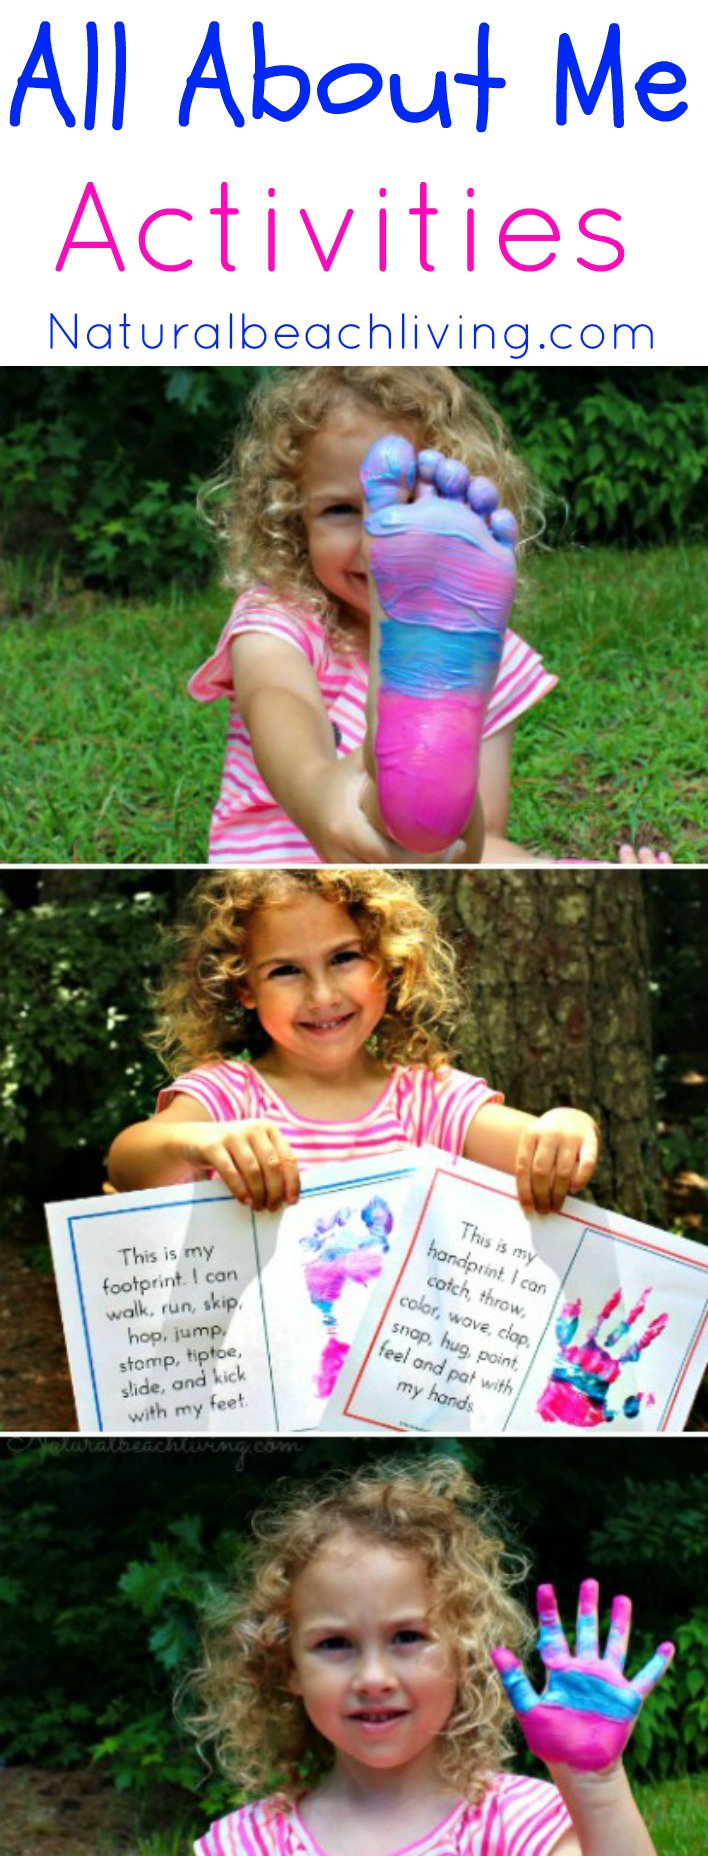 Learn How to Make Super Cool Sharpie Tie Dye Shirts, This Tie Dye Craft is perfect for a summer activity and for Kid Made Gifts, Summer Crafts for kids and Sharpie Art Ideas, This can also be a fun  a color mixing science experiment with Sharpie dyeing and art for kids